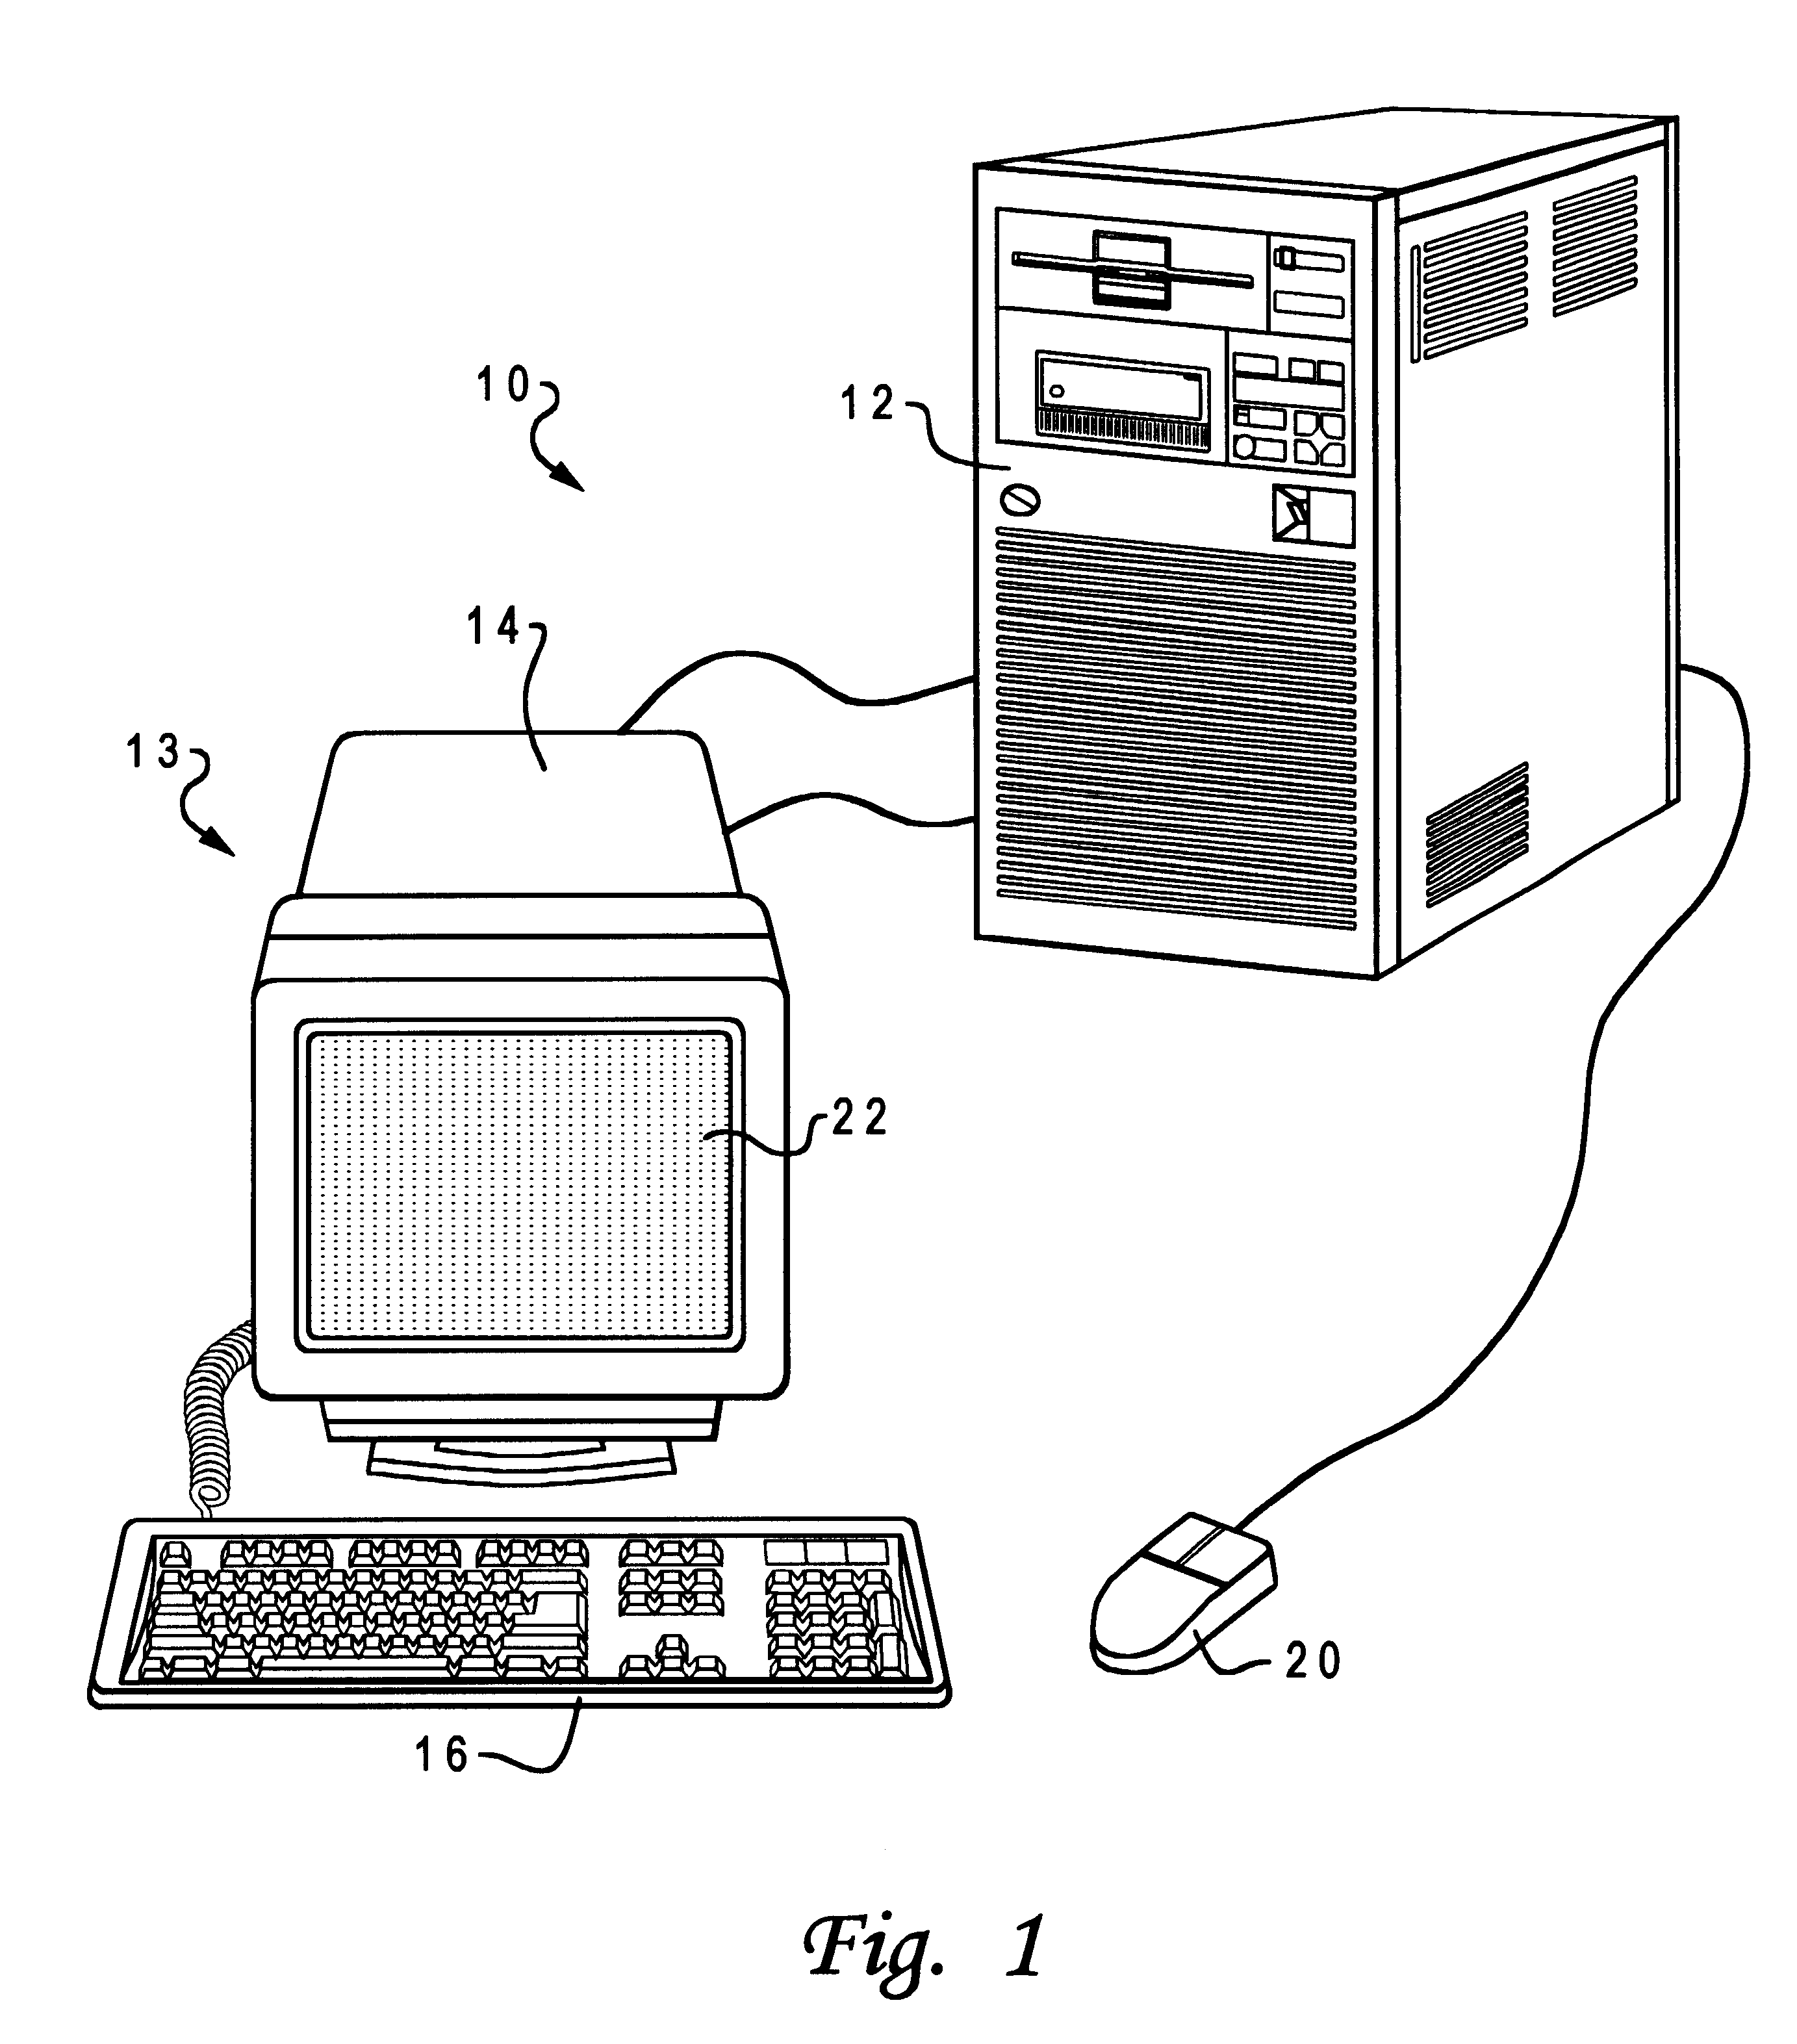 Method and system for incrementally compiling instrumentation into a simulation model